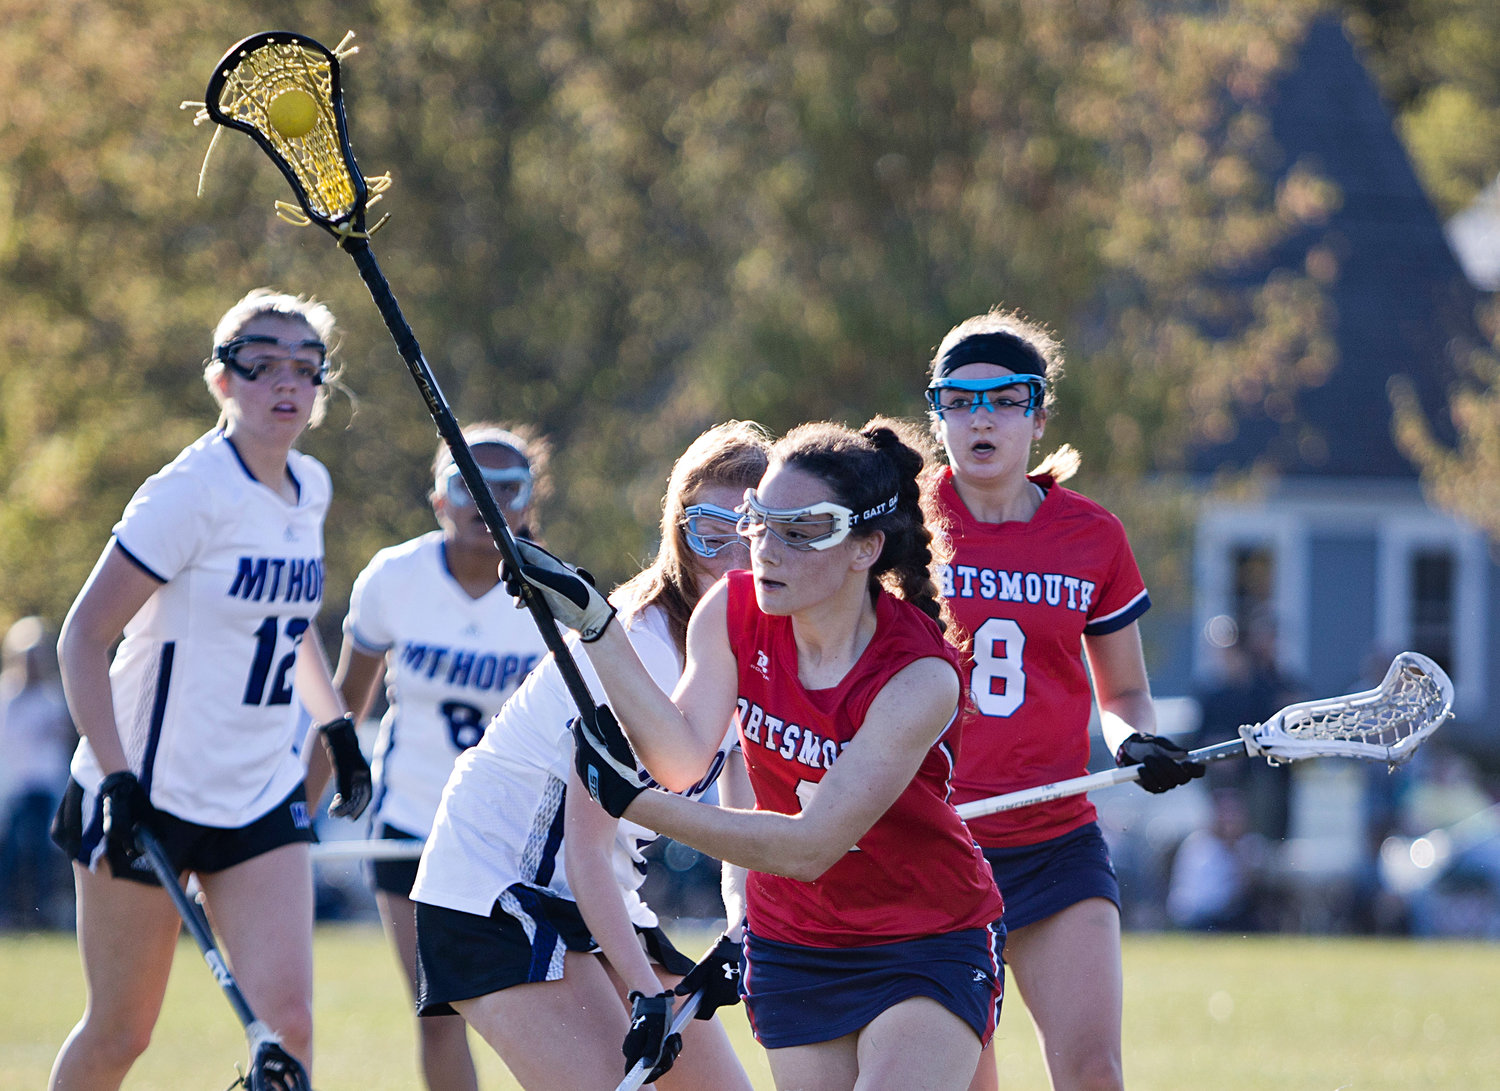 Elly Skeels, who had four goals against the Huskies, runs away from Mt. Hope defenders after catching a pass.